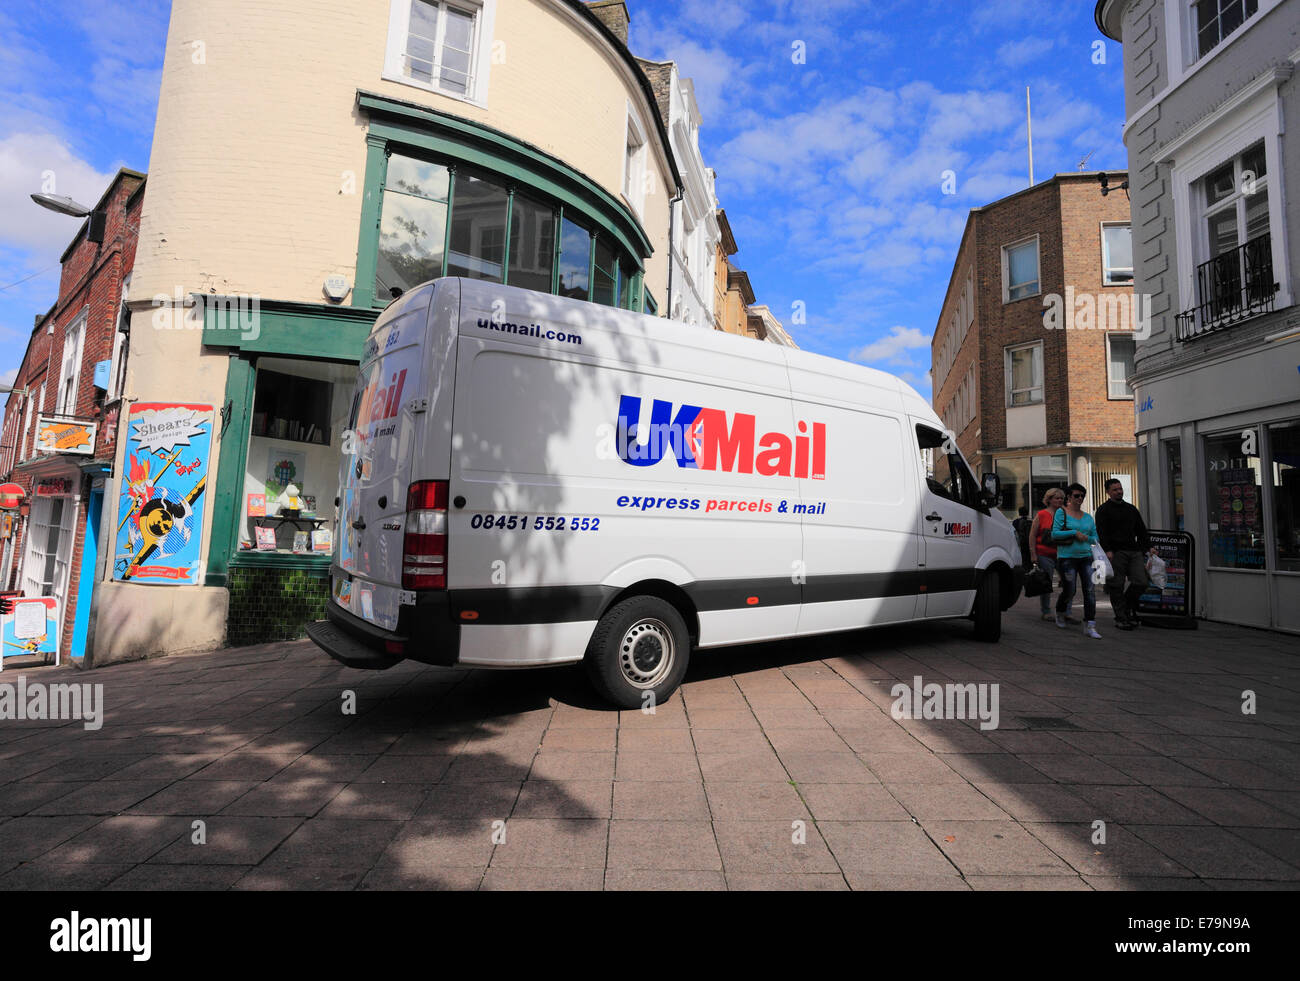 UKMail delivery van on a pedestrain street in Norwich City centre. Stock Photo